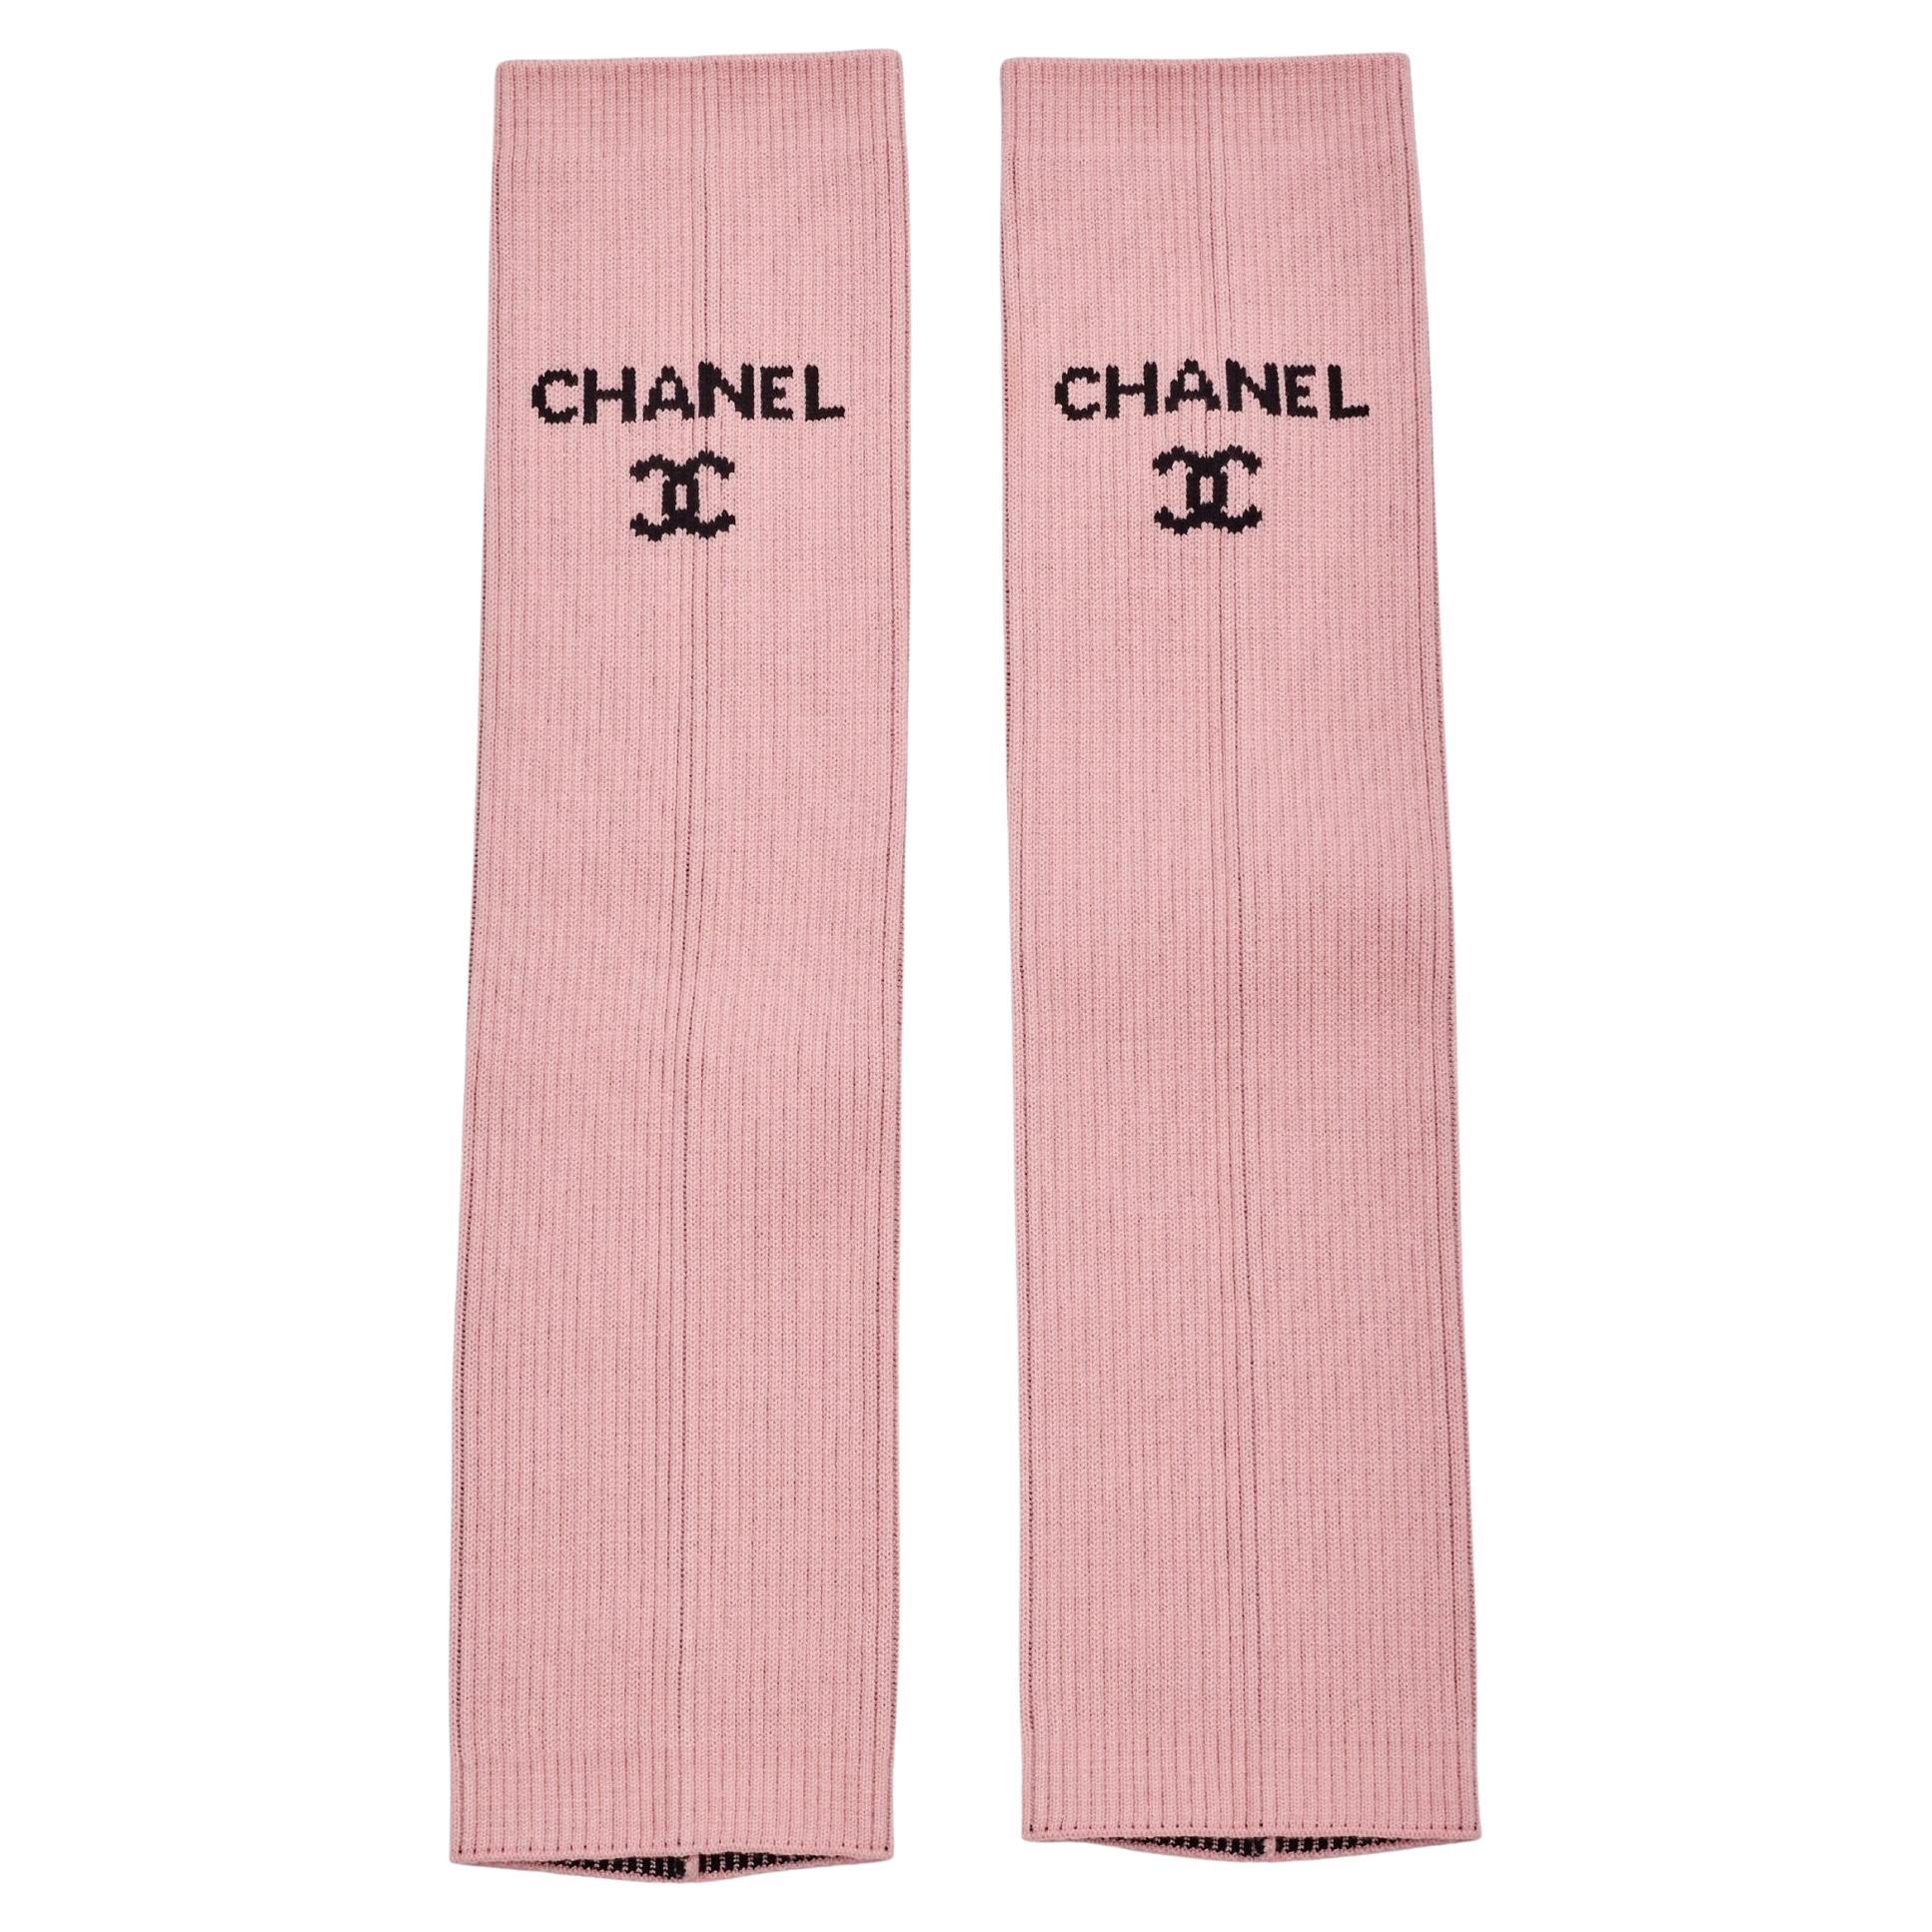 Chanel Logo Pink Knit Leg Warmers Gaiters For Sale